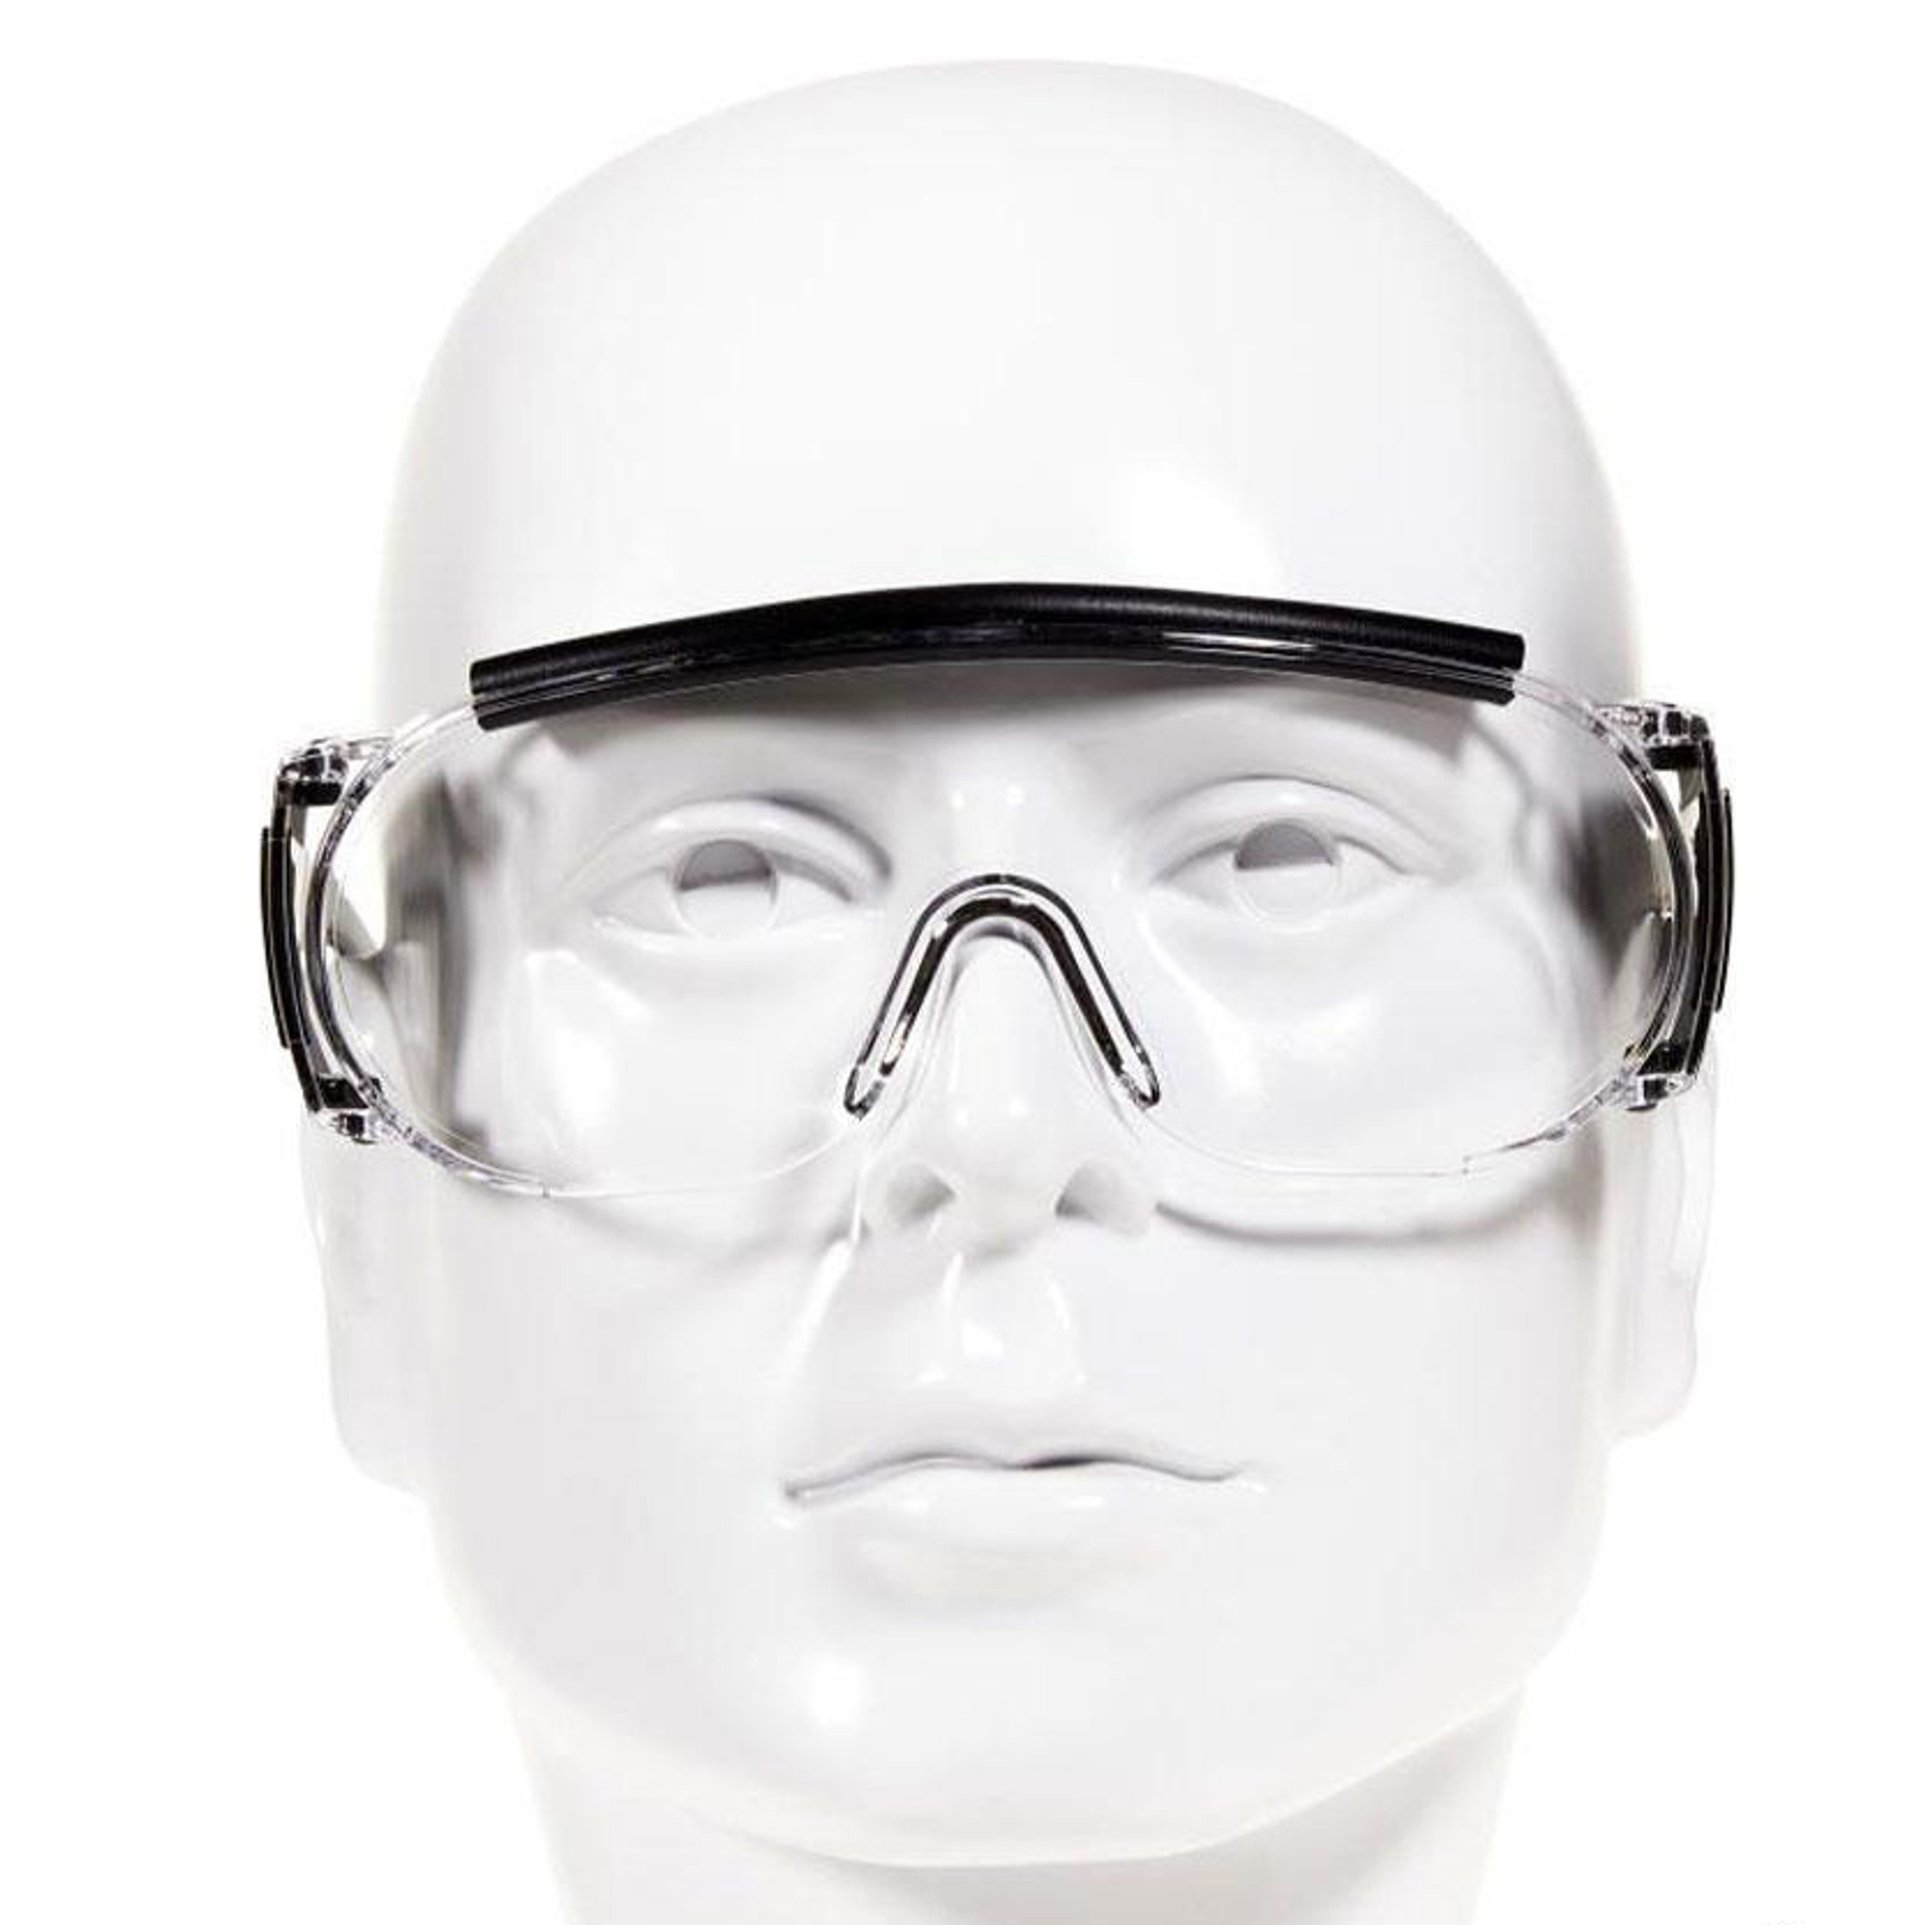 Allen Company Shooting And Safety Fit Over Glasses Hero Outdoors